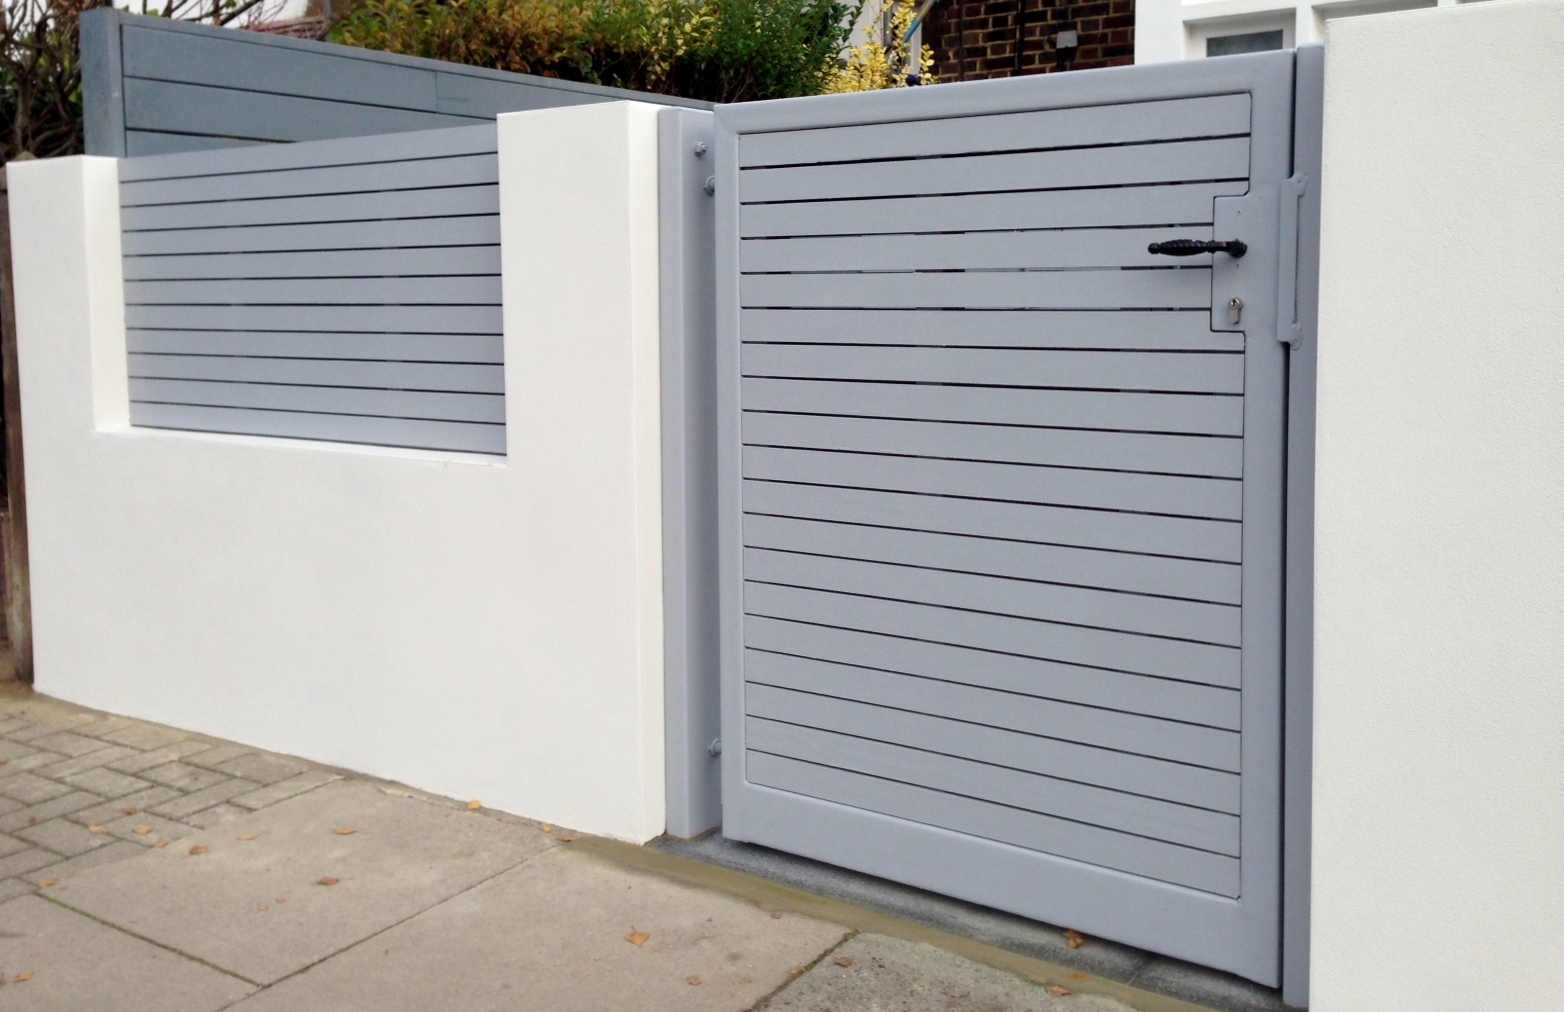 front boundary wall screen automated electronic gate installation grey wooden fence bike store modern garden design balham clapham london (7)